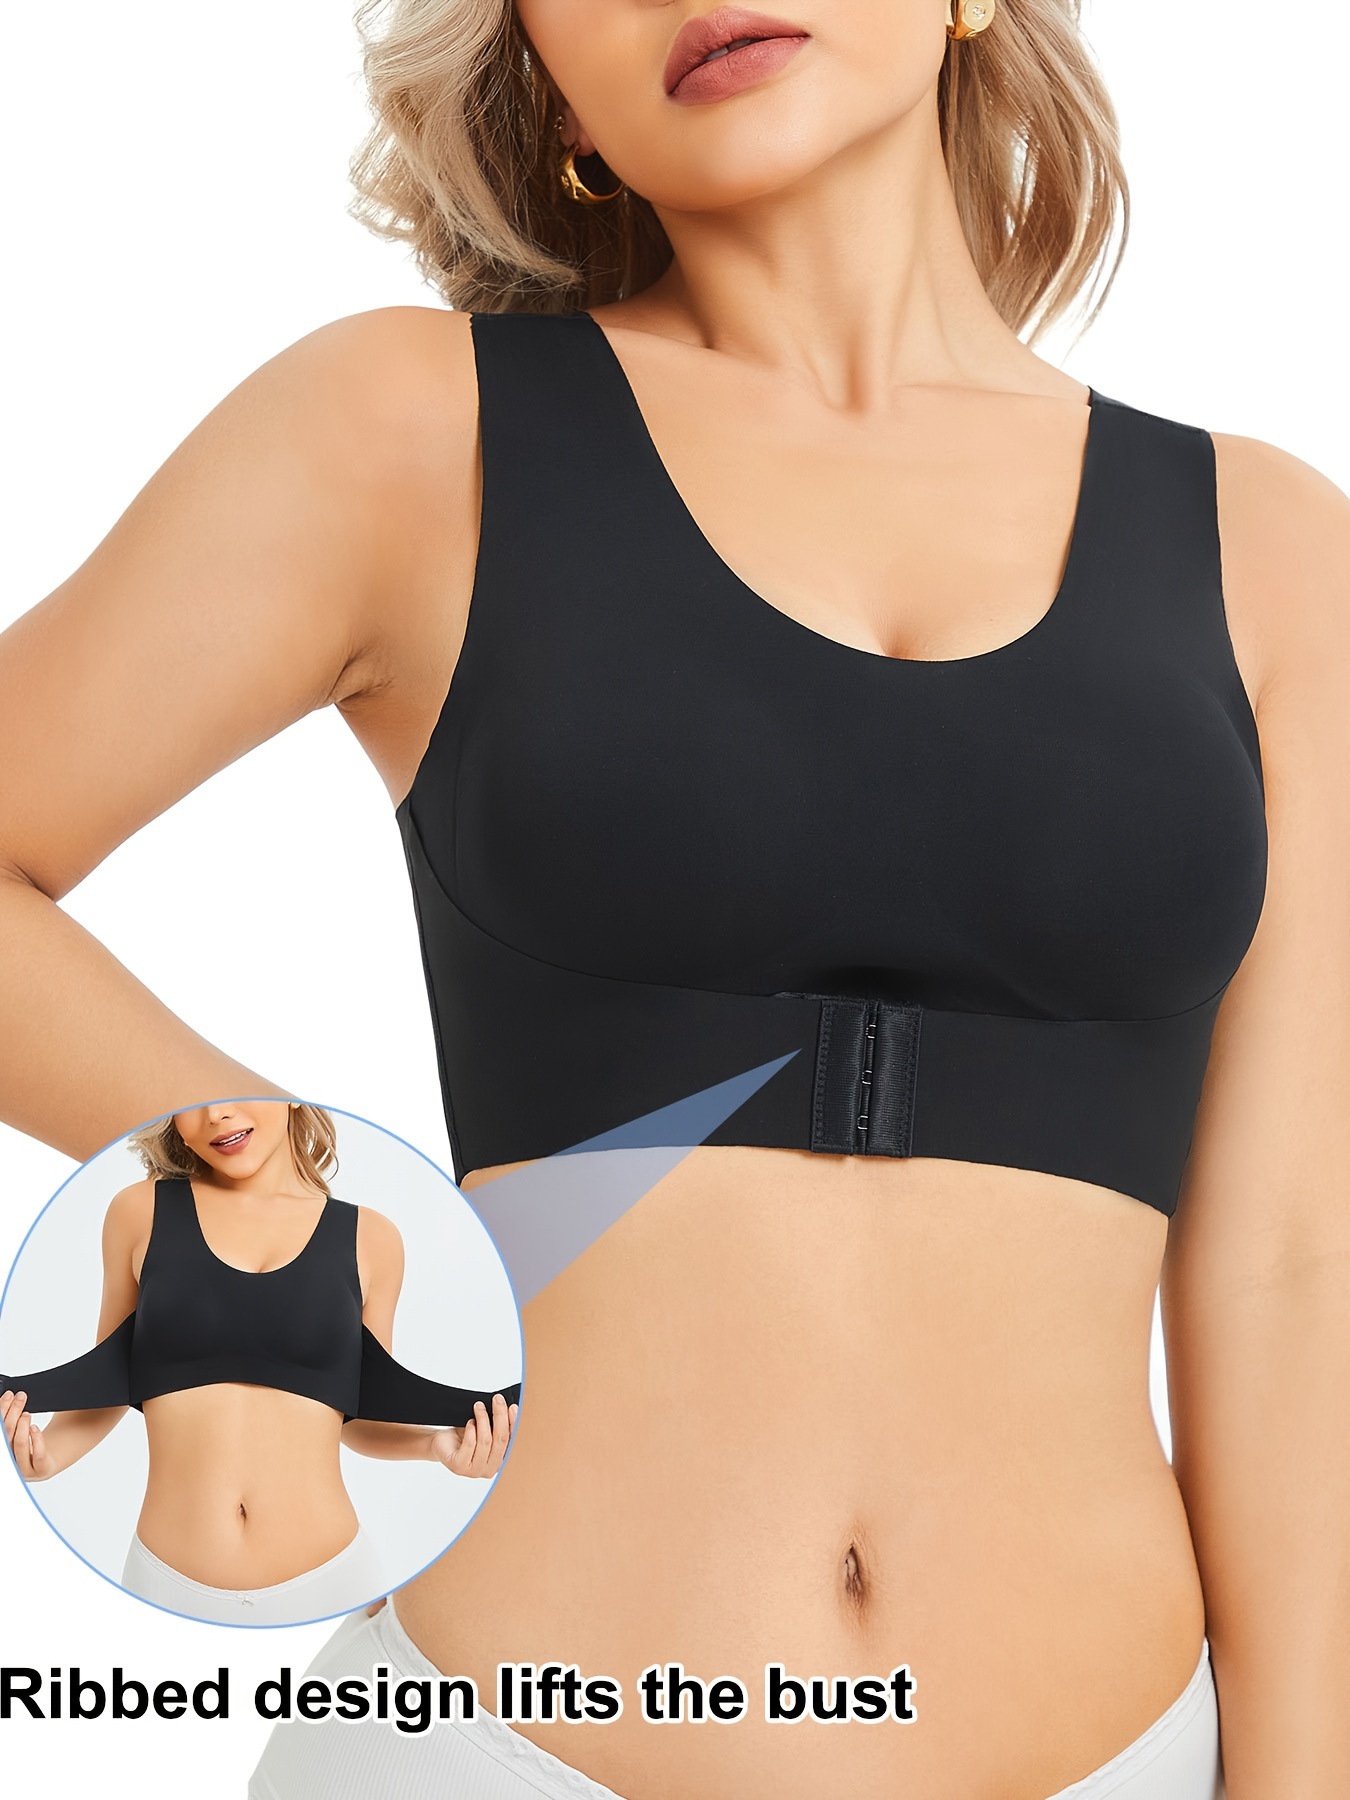 Seamless Front Buckle Support Bra & 2-in-1 Kyphosis Correction Bra